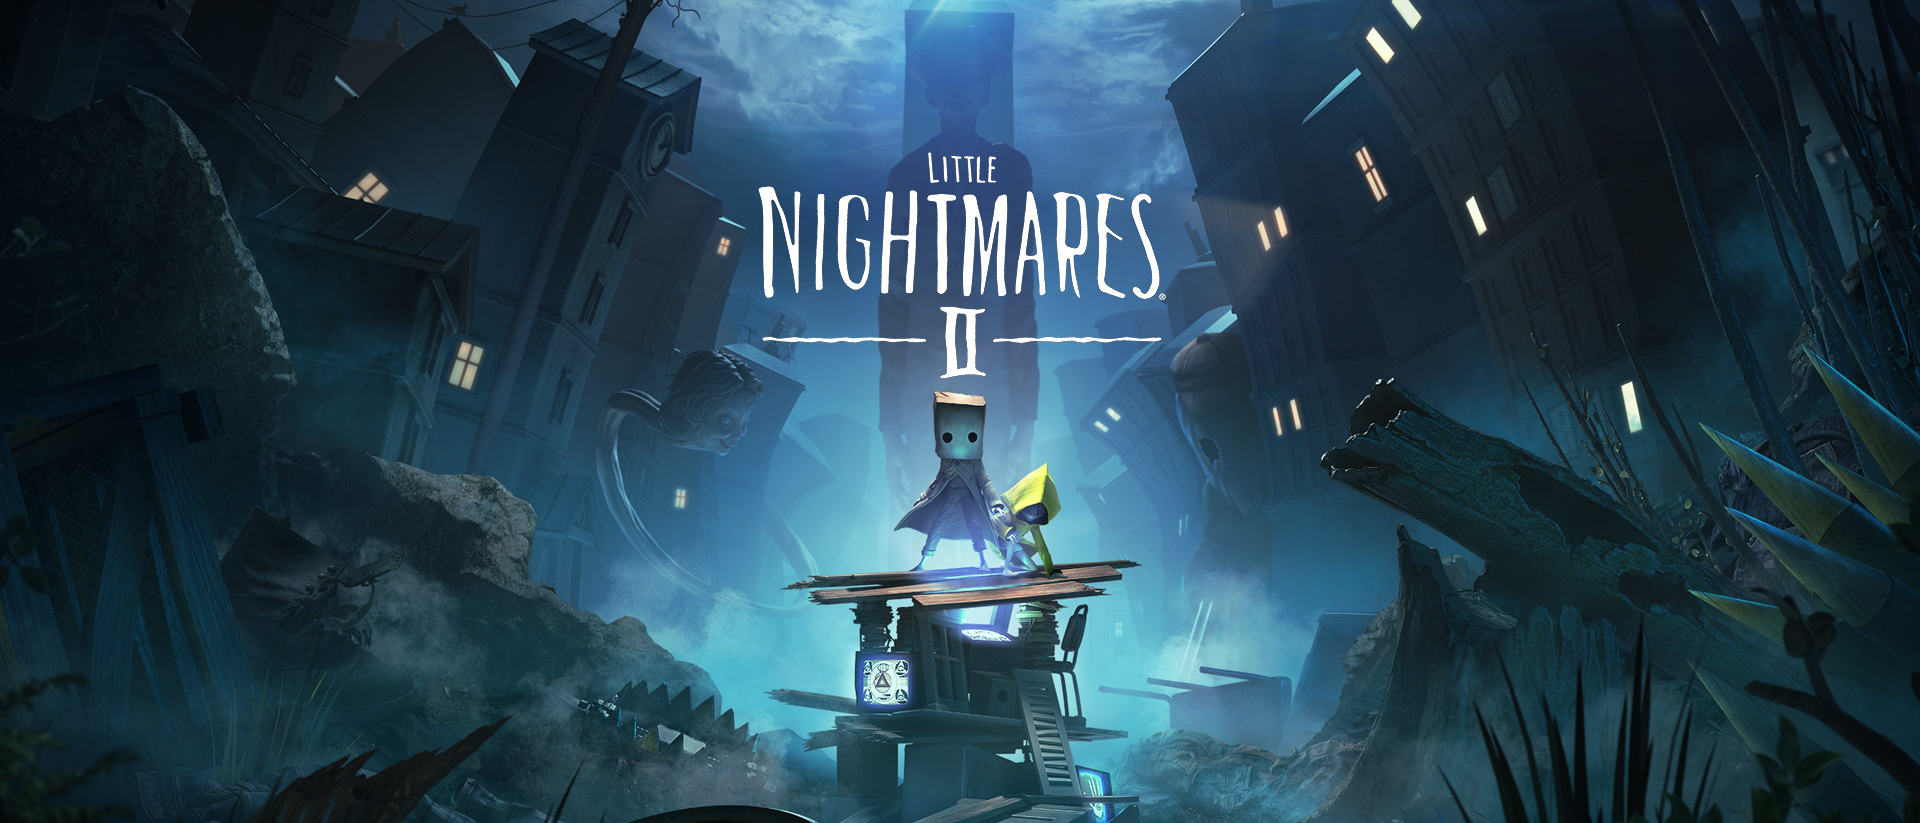 Little Nightmares II System Requirements - Can I Run It? - PCGameBenchmark